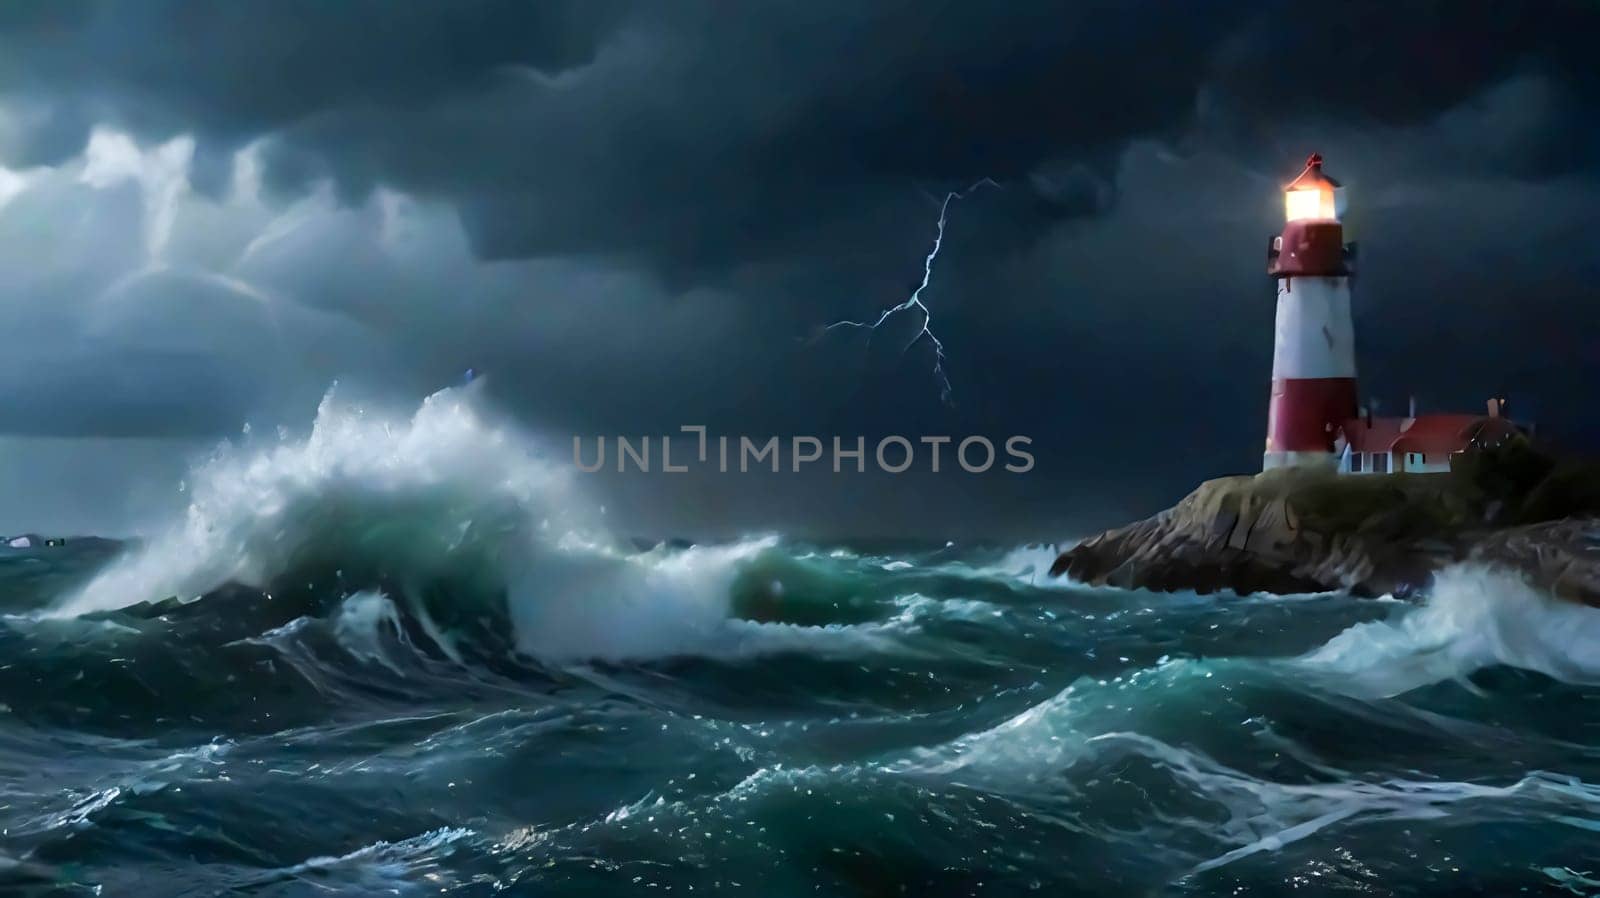 Lighthouse on the rocks by the raging waves. Lighthouse on sea rock. Sea rock lighthouse. Coastal lighthouse landscape for content creation